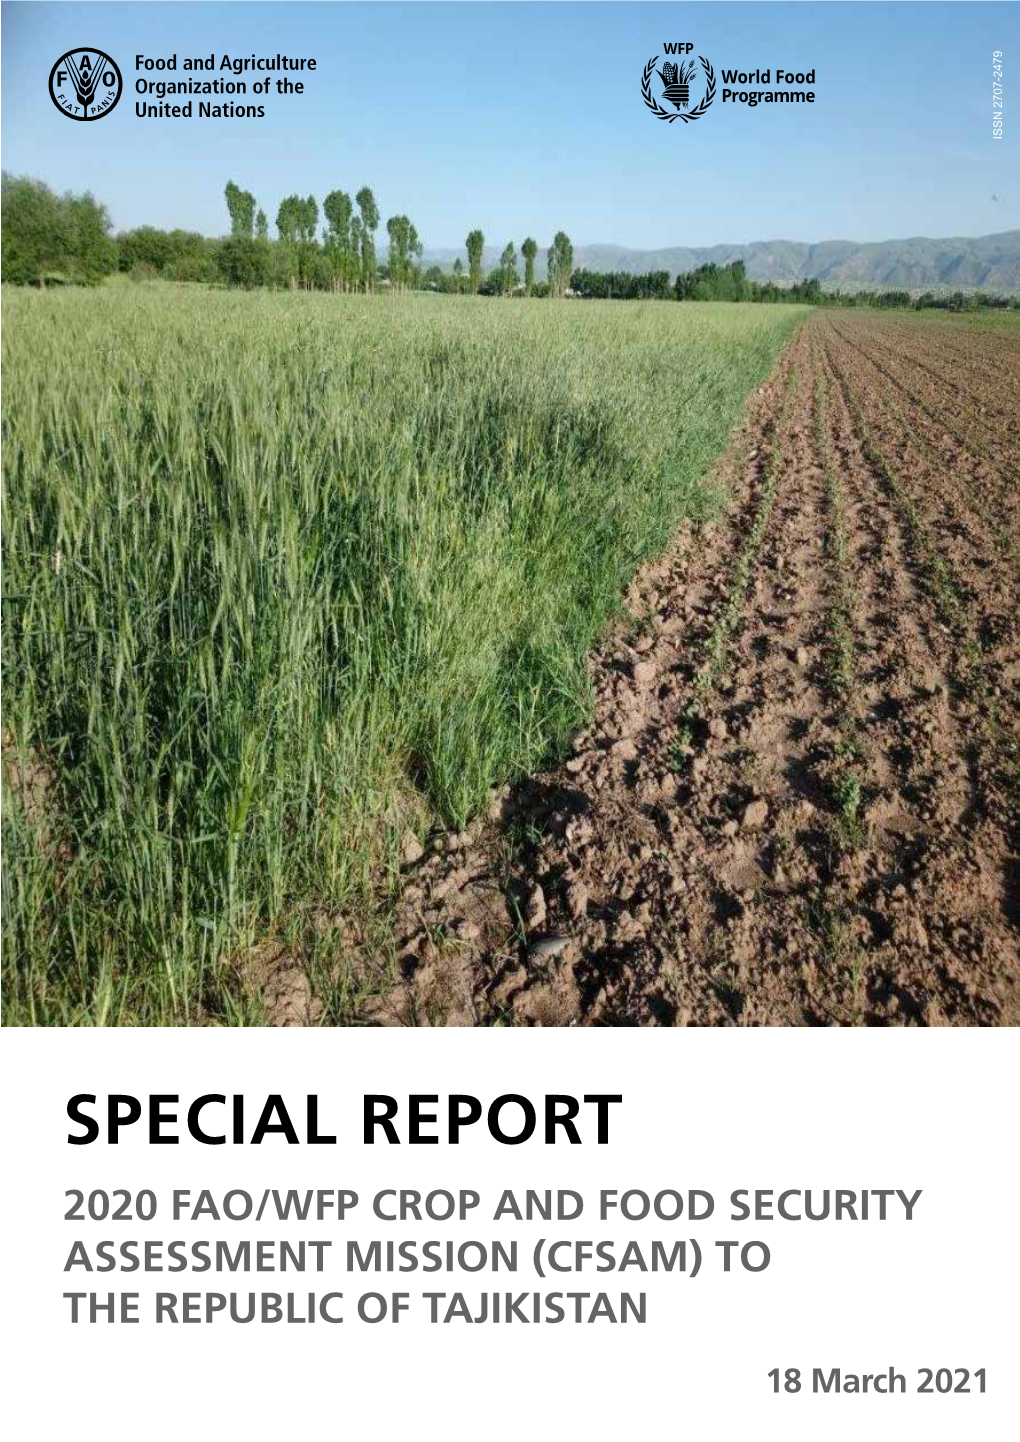 SPECIAL REPORT 2020 FAO/WFP CROP and FOOD SECURITY ASSESSMENT MISSION (CFSAM) to the REPUBLIC of TAJIKISTAN 18 March 2021